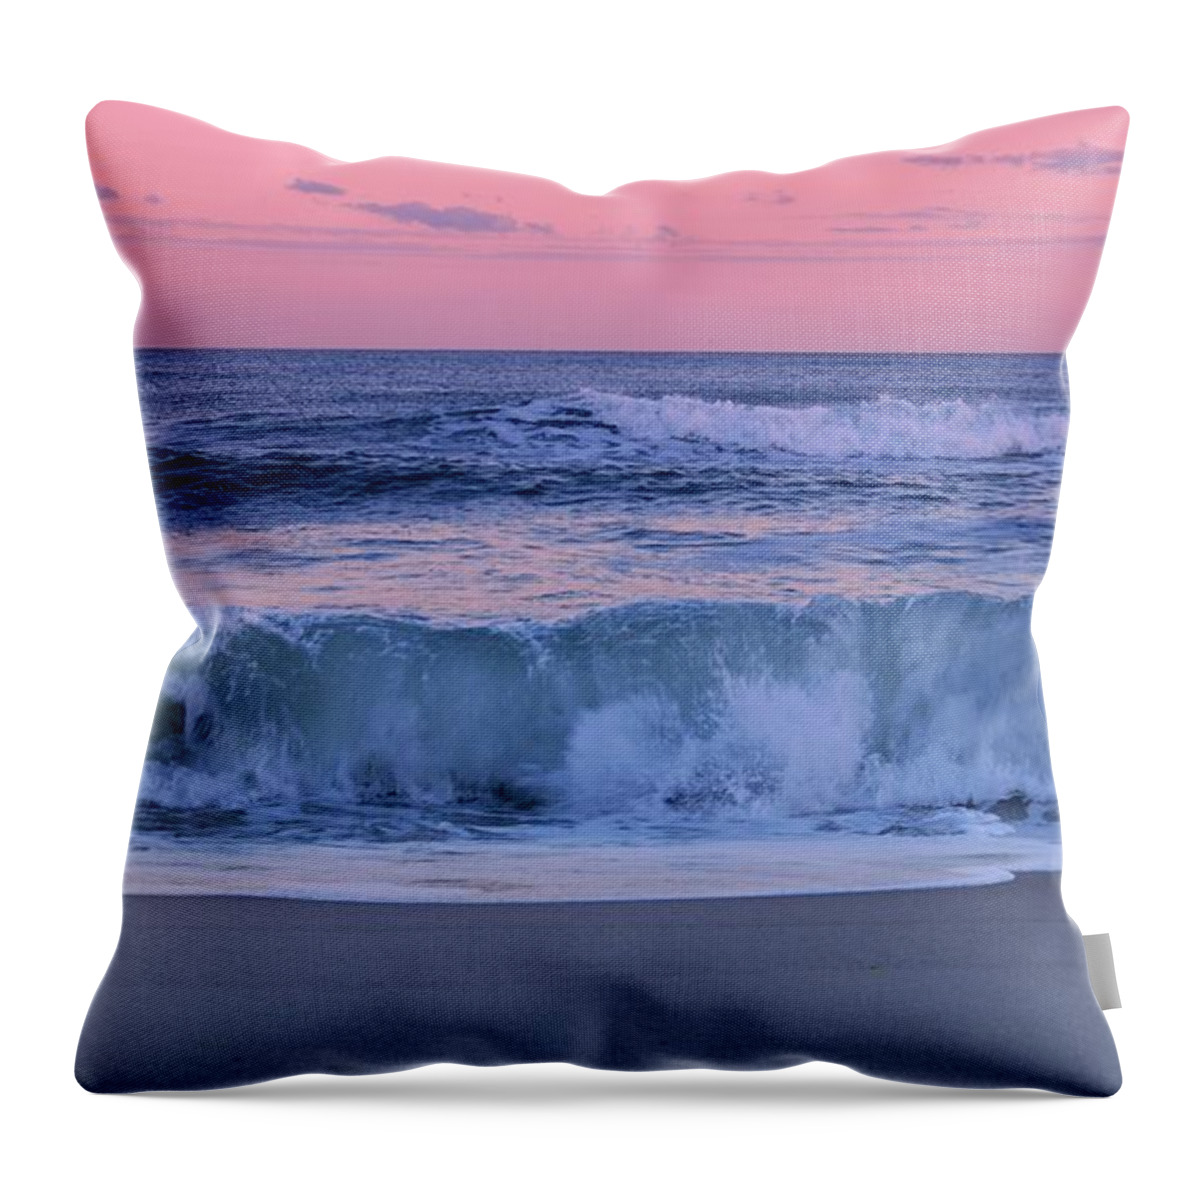 Jersey Shore Throw Pillow featuring the photograph Evening Waves - Jersey Shore by Angie Tirado